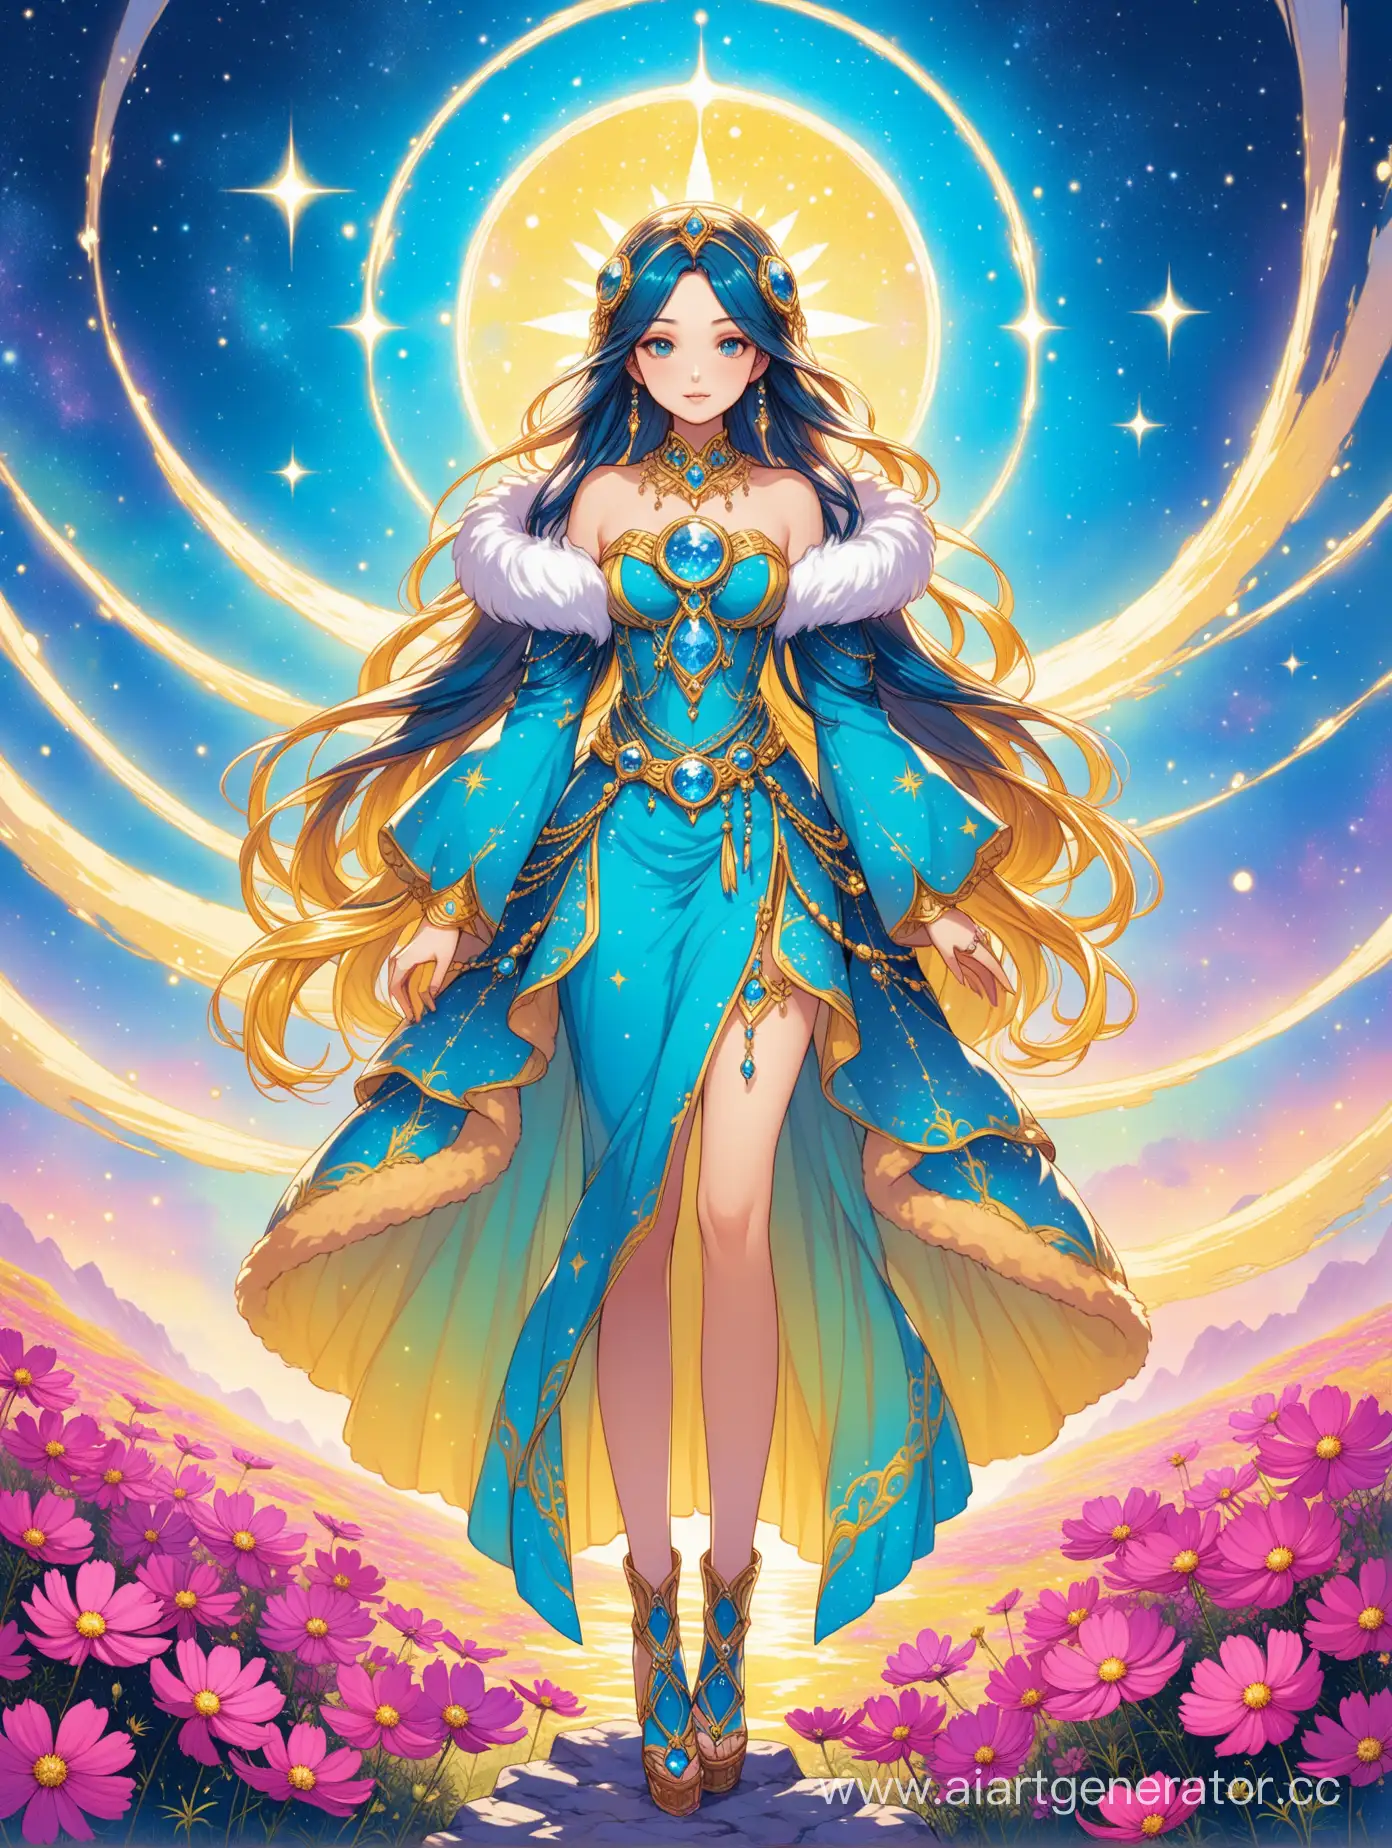 Fantasy-Girl-in-Celestial-Cosmos-Extravagantly-Adorned-in-YellowBlue-Palette